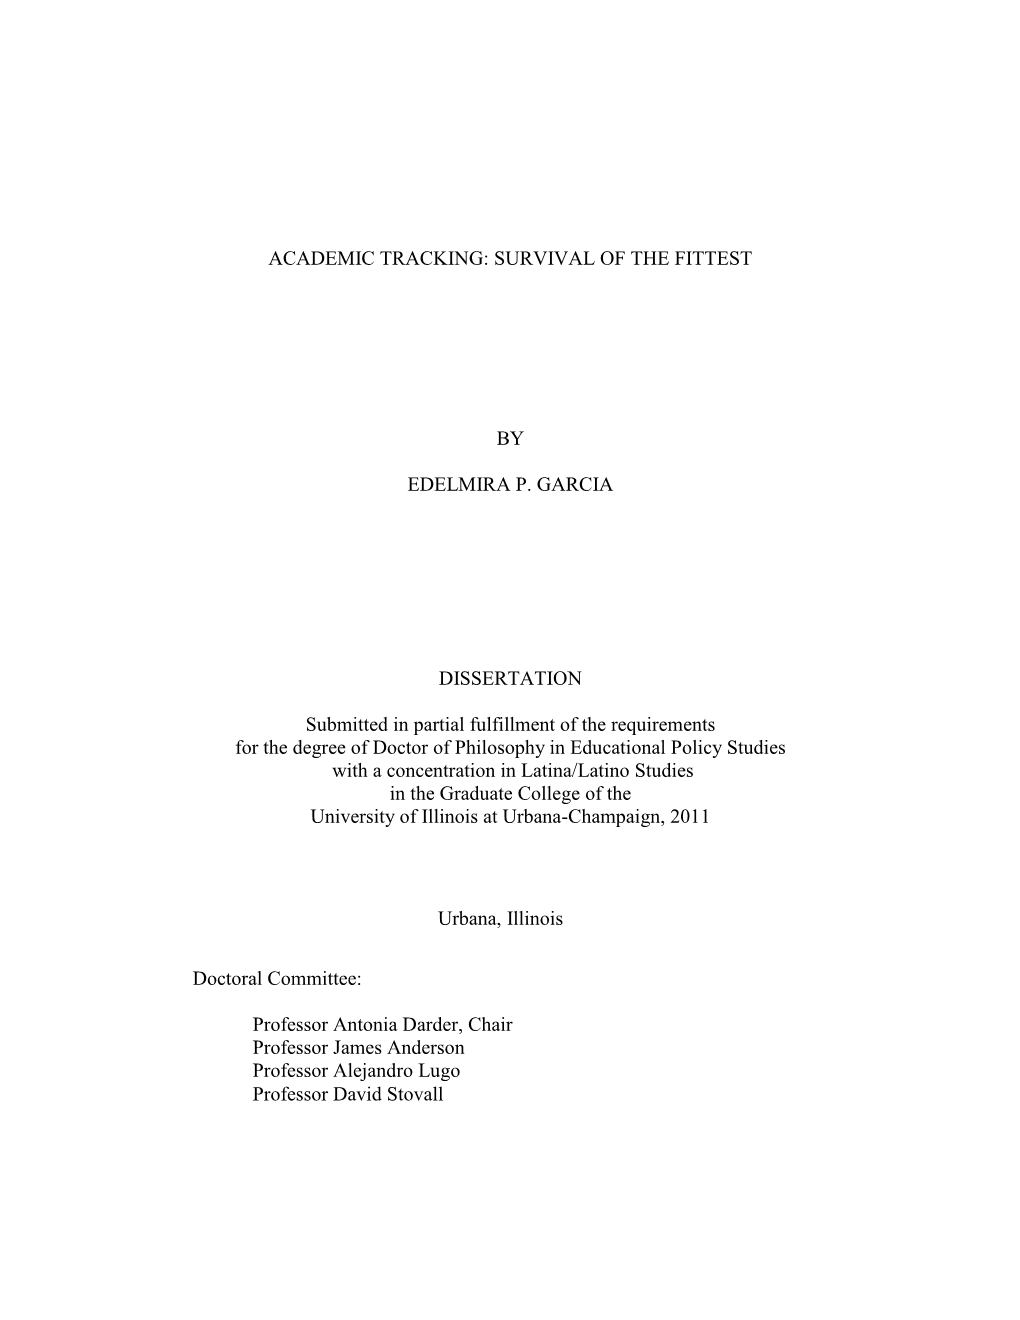 SURVIVAL of the FITTEST by EDELMIRA P. GARCIA DISSERTATION Submitted in Partial Fulfillment of the Requiremen